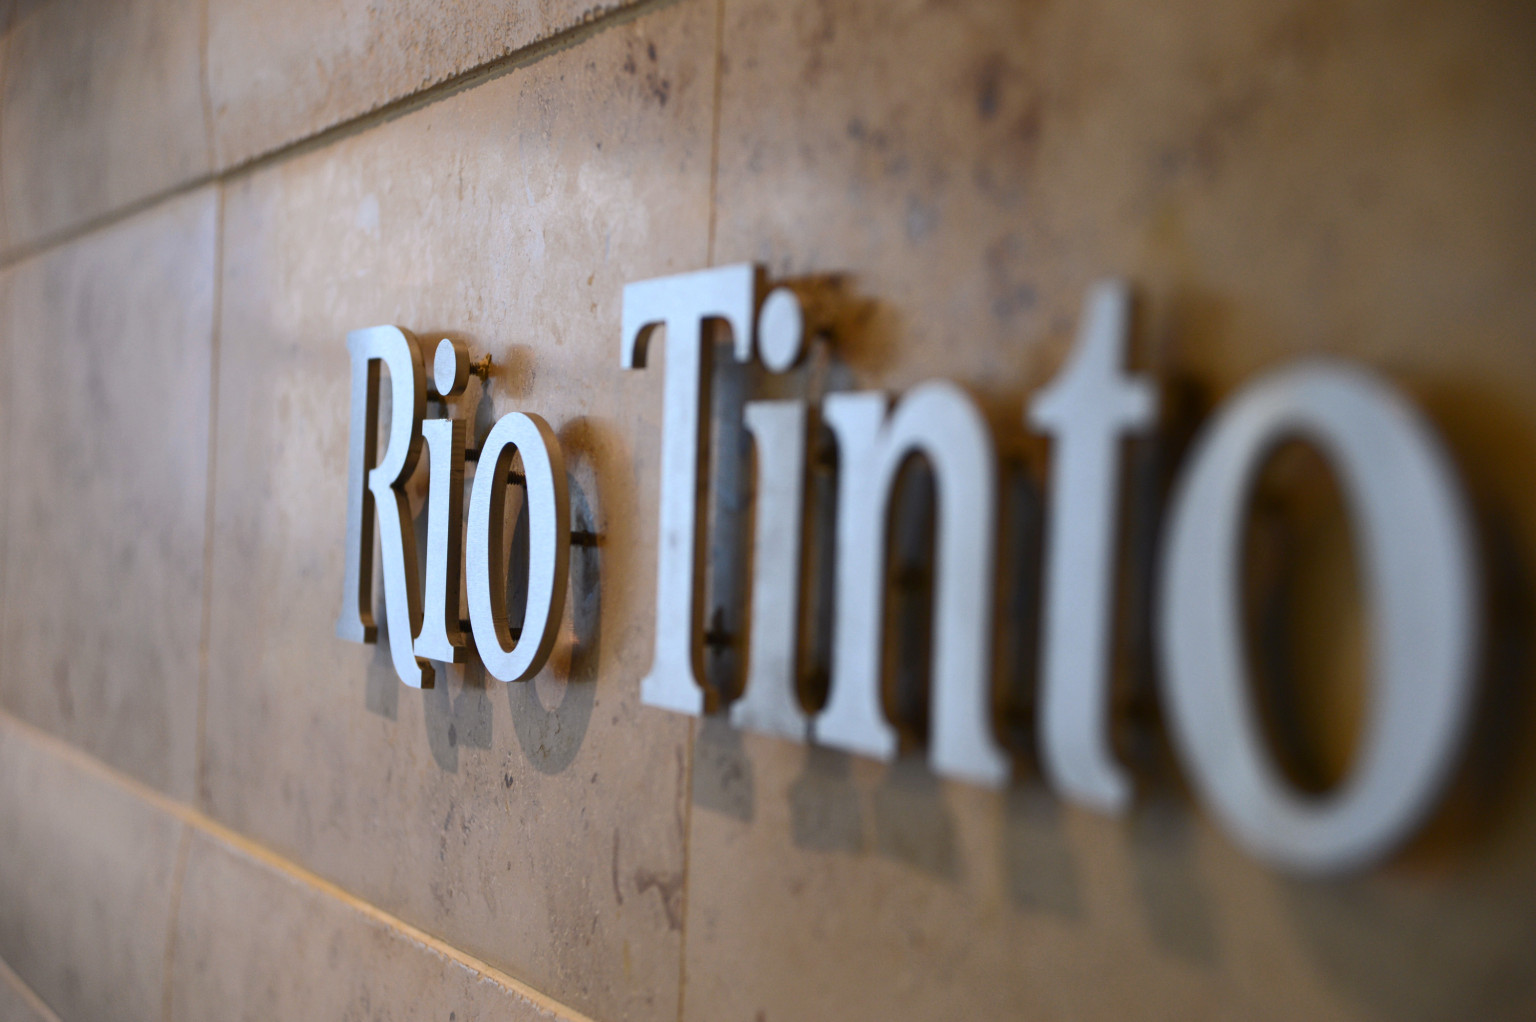 The Rio Tinto Group logo is mounted on a wall near the reception area of the company's offices in Melbourne, Australia, on Thursday, Feb. 28, 2013. Rio Tinto, the world's second-biggest mining company, named non-executive board director Christopher Lynch as chief financial officer to replace Guy Elliott who announced his retirement in July. Photographer: Carla Gottgens/Bloomberg via Getty Images